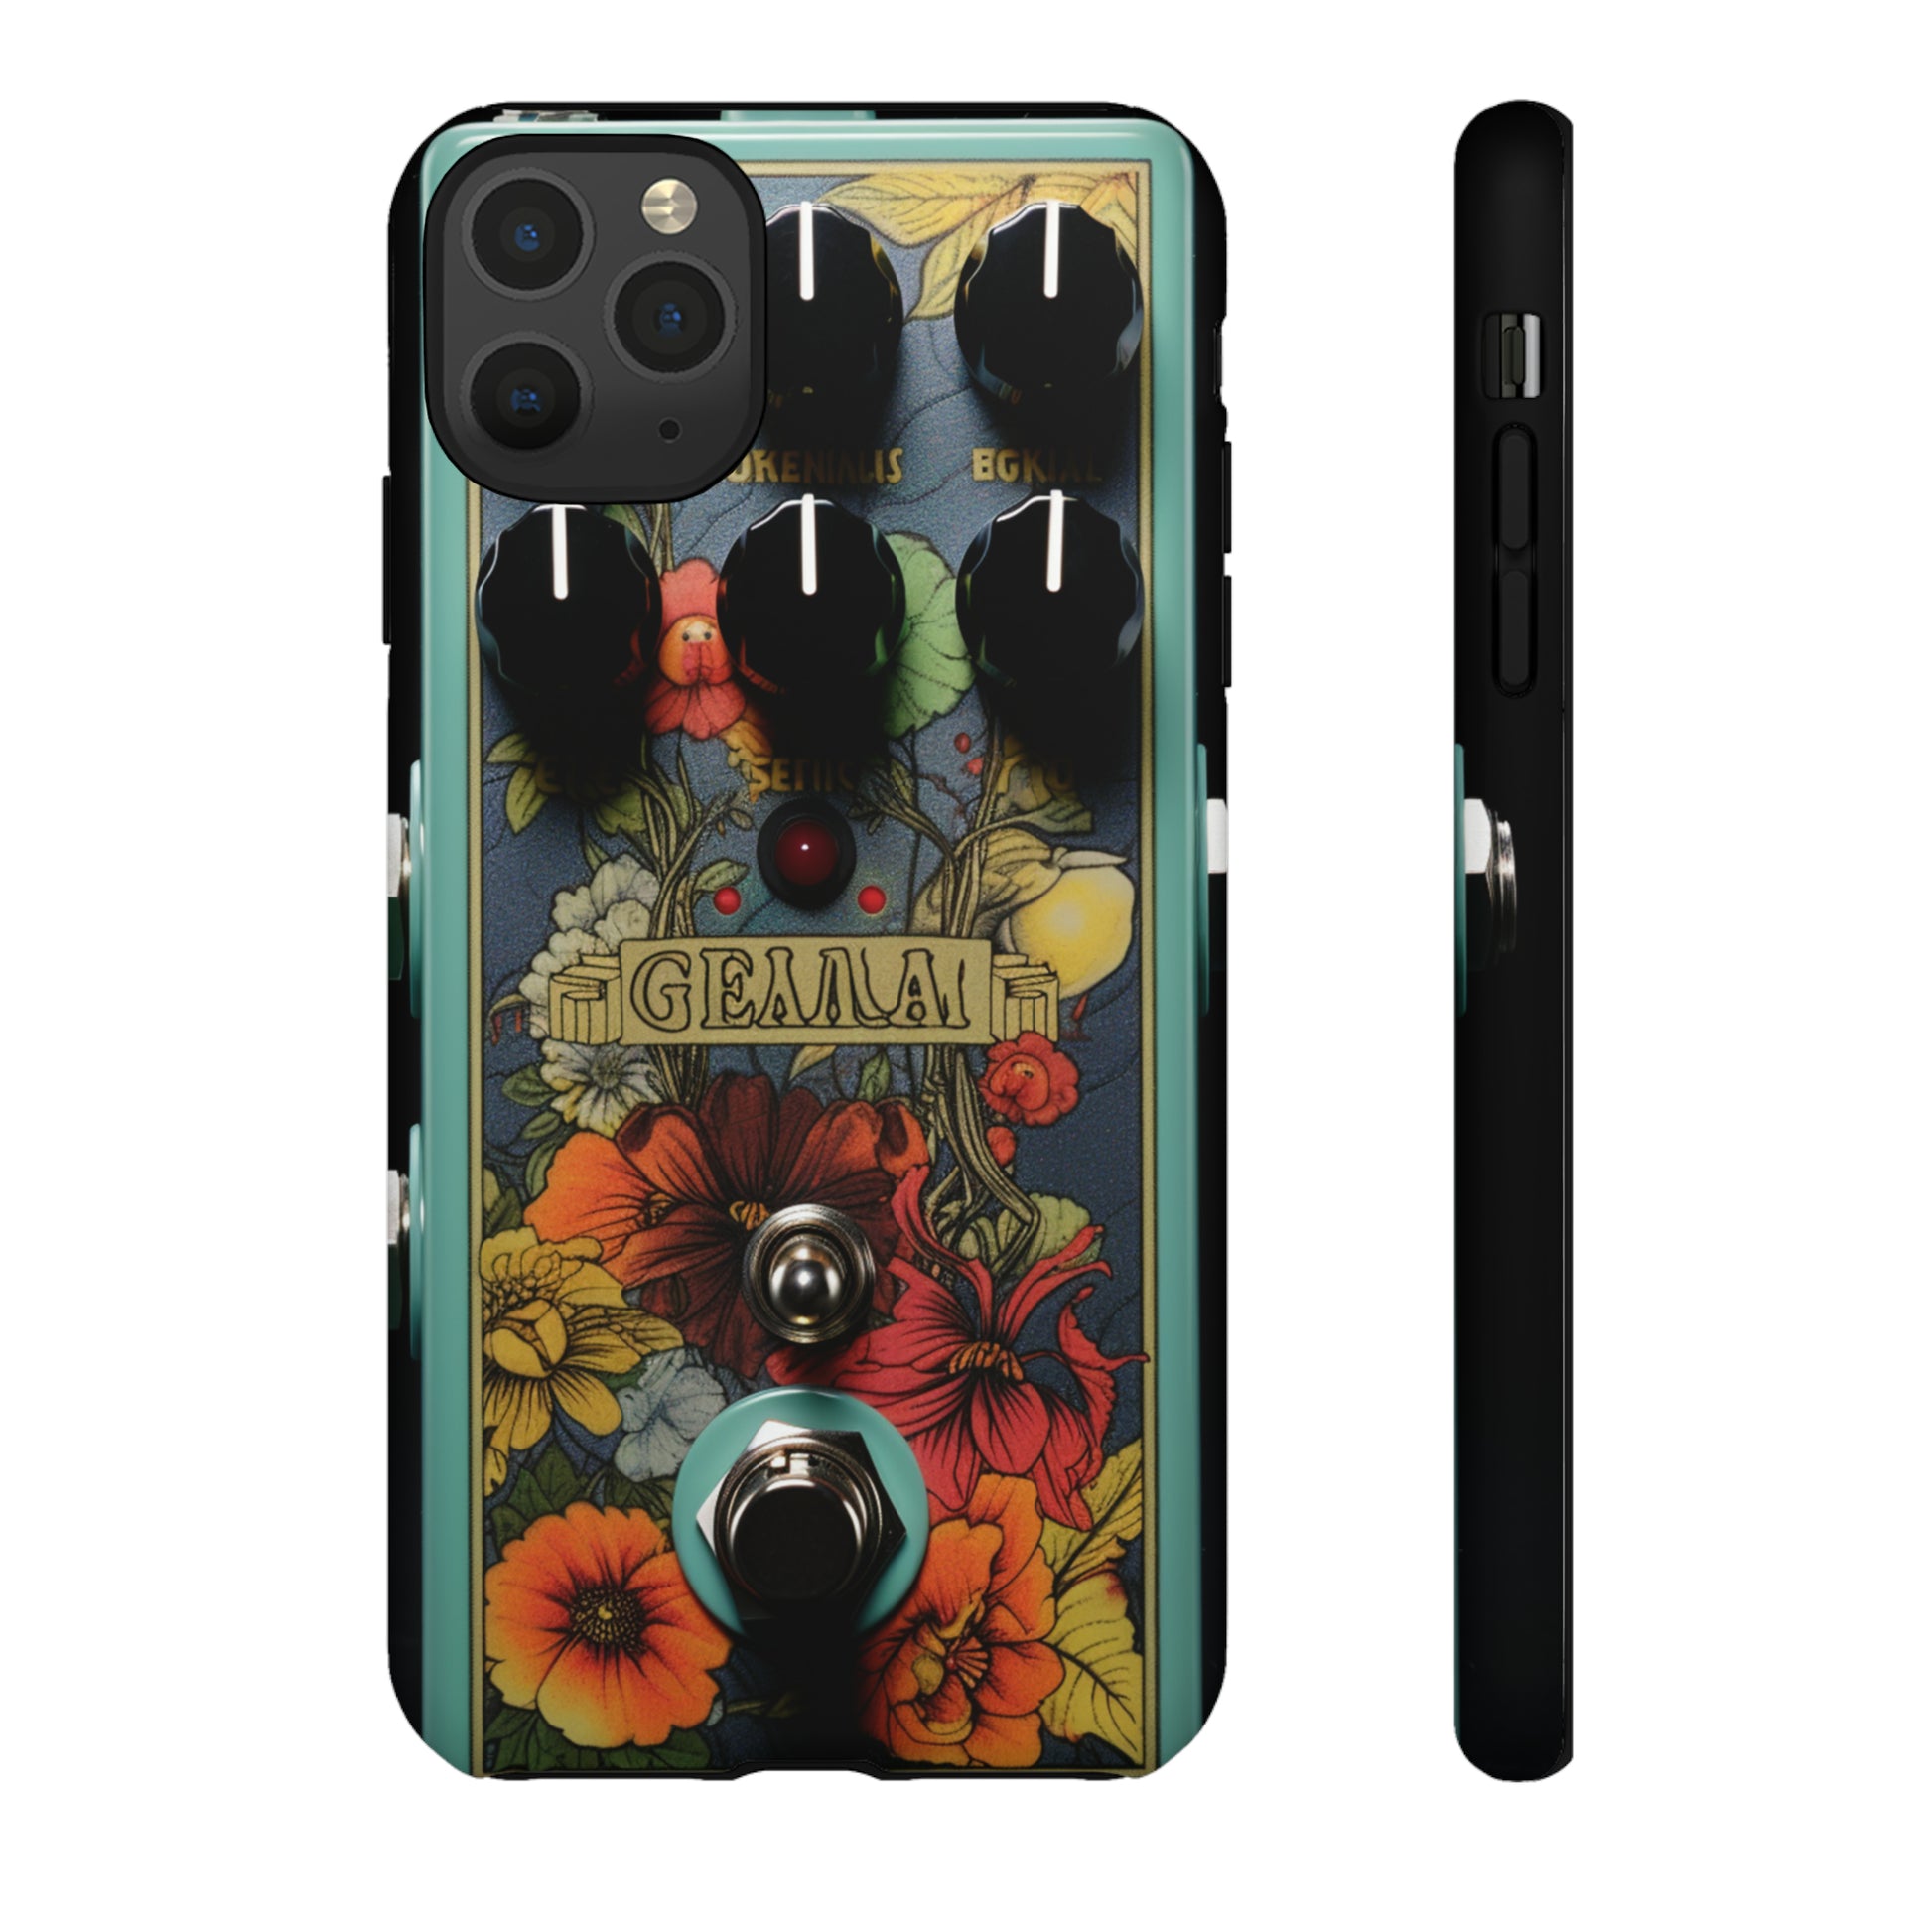 Psychedelic 1960s guitar pedal design on iPhone 15 case